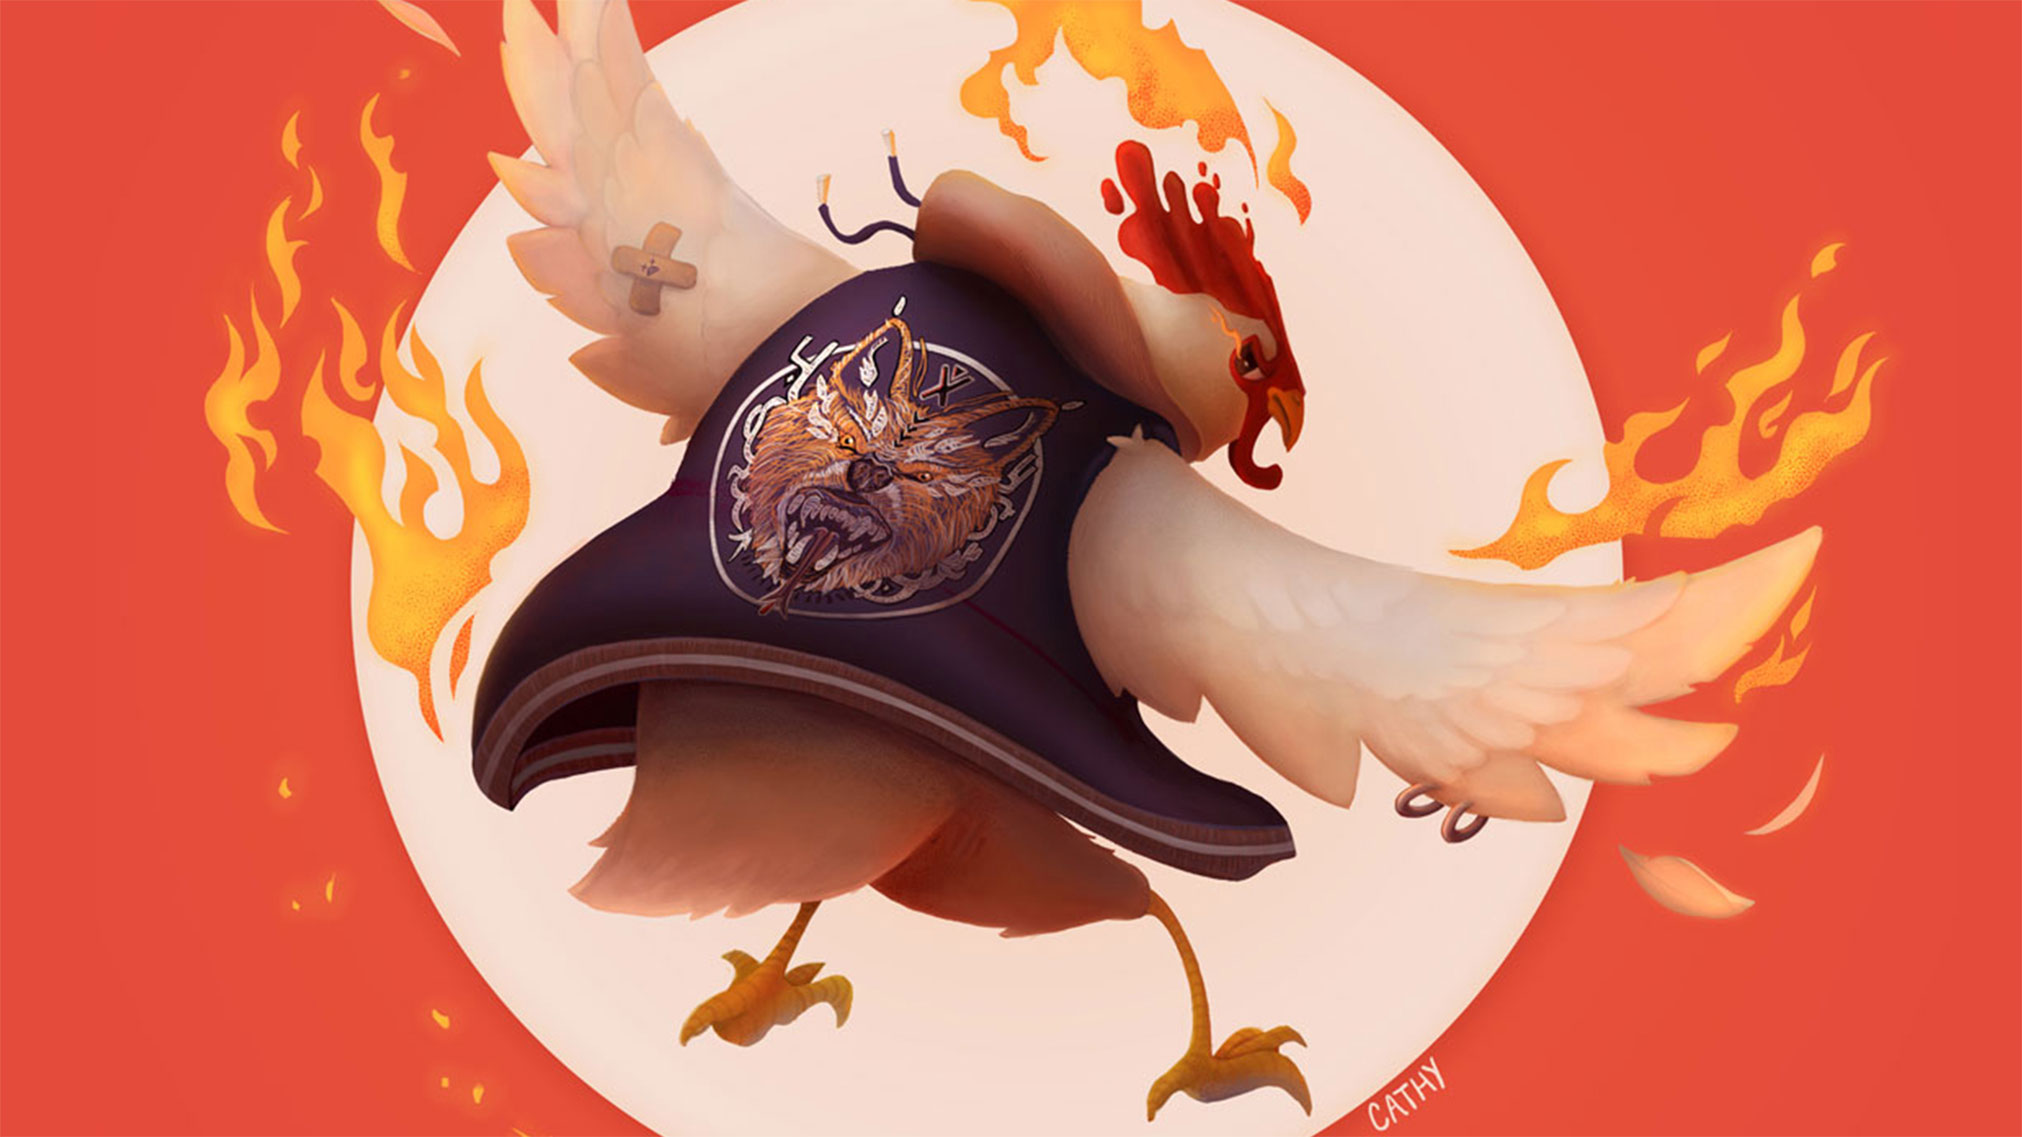 This illustration was initially done for the monthly Character Design Challenge, but was re-imagined as a potential cover for a food truck. Chickens may not fly really high or for long distances, but this one found a way to be fast and agile.
